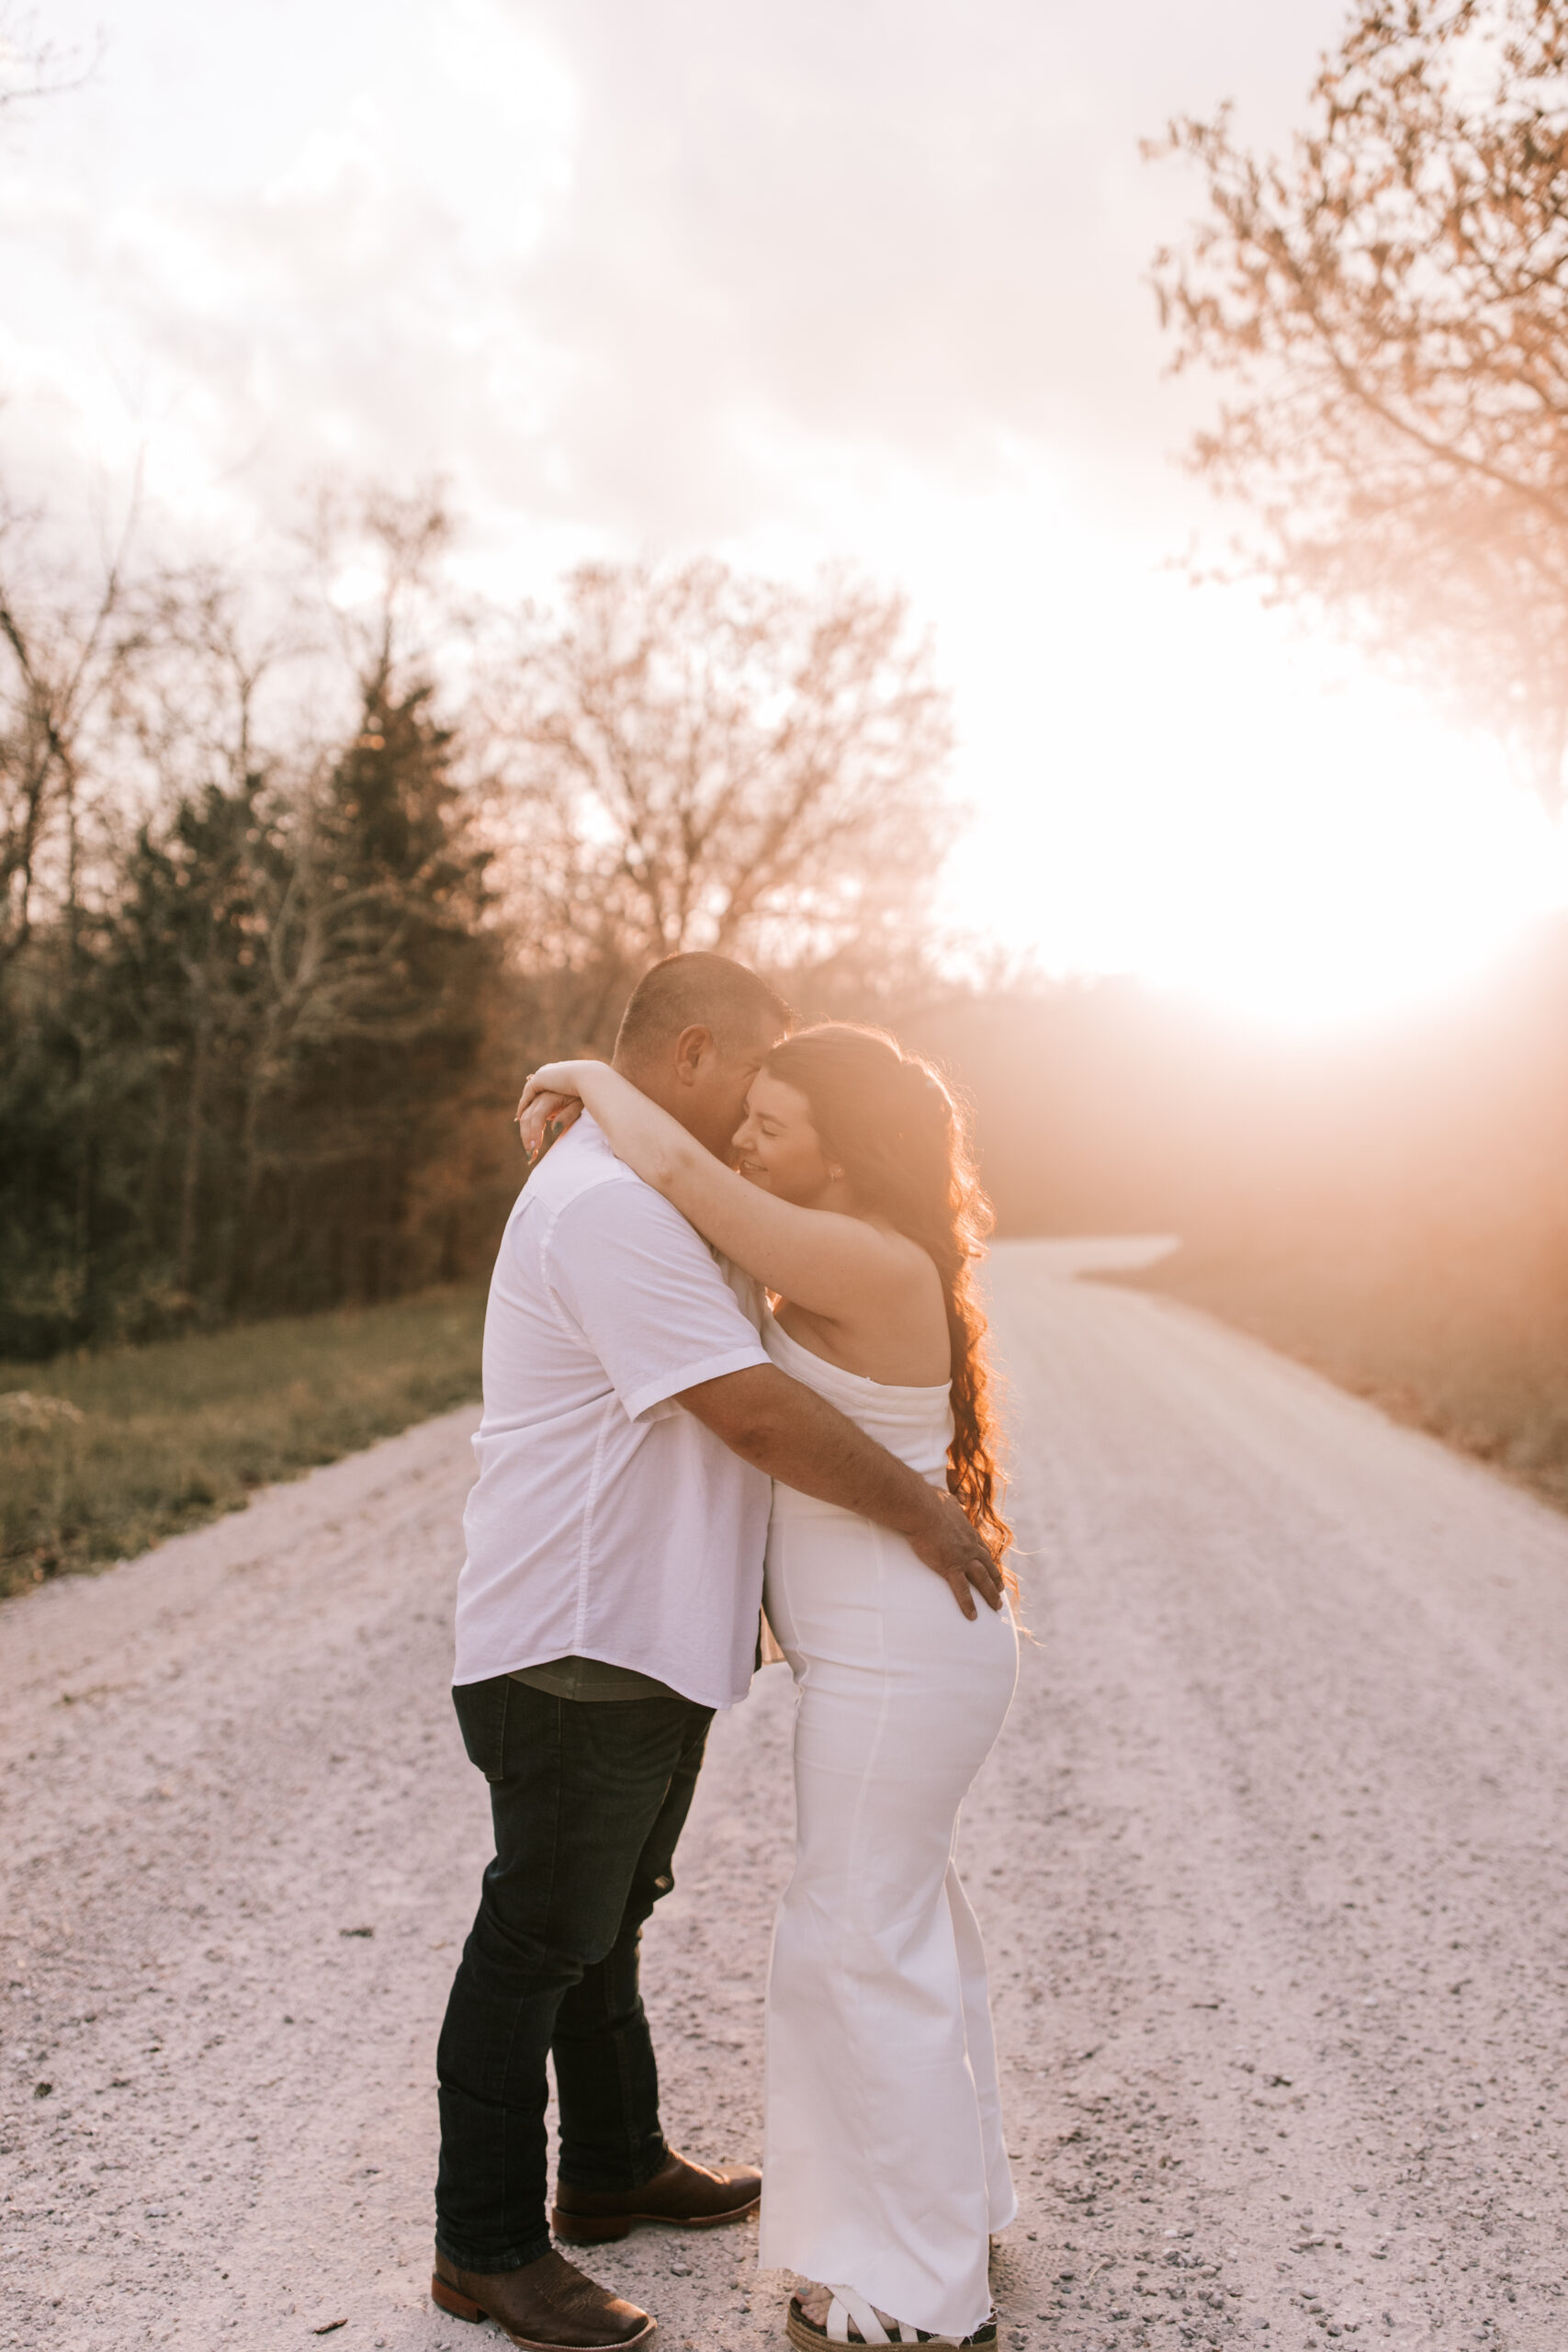 Missouri engagement photo. Couple is standing on a gravel road with the sun setting in the background. She is wearing a white dress and he is wearing a white shirt and jeans. Photo by Bailey Morris wedding photography.